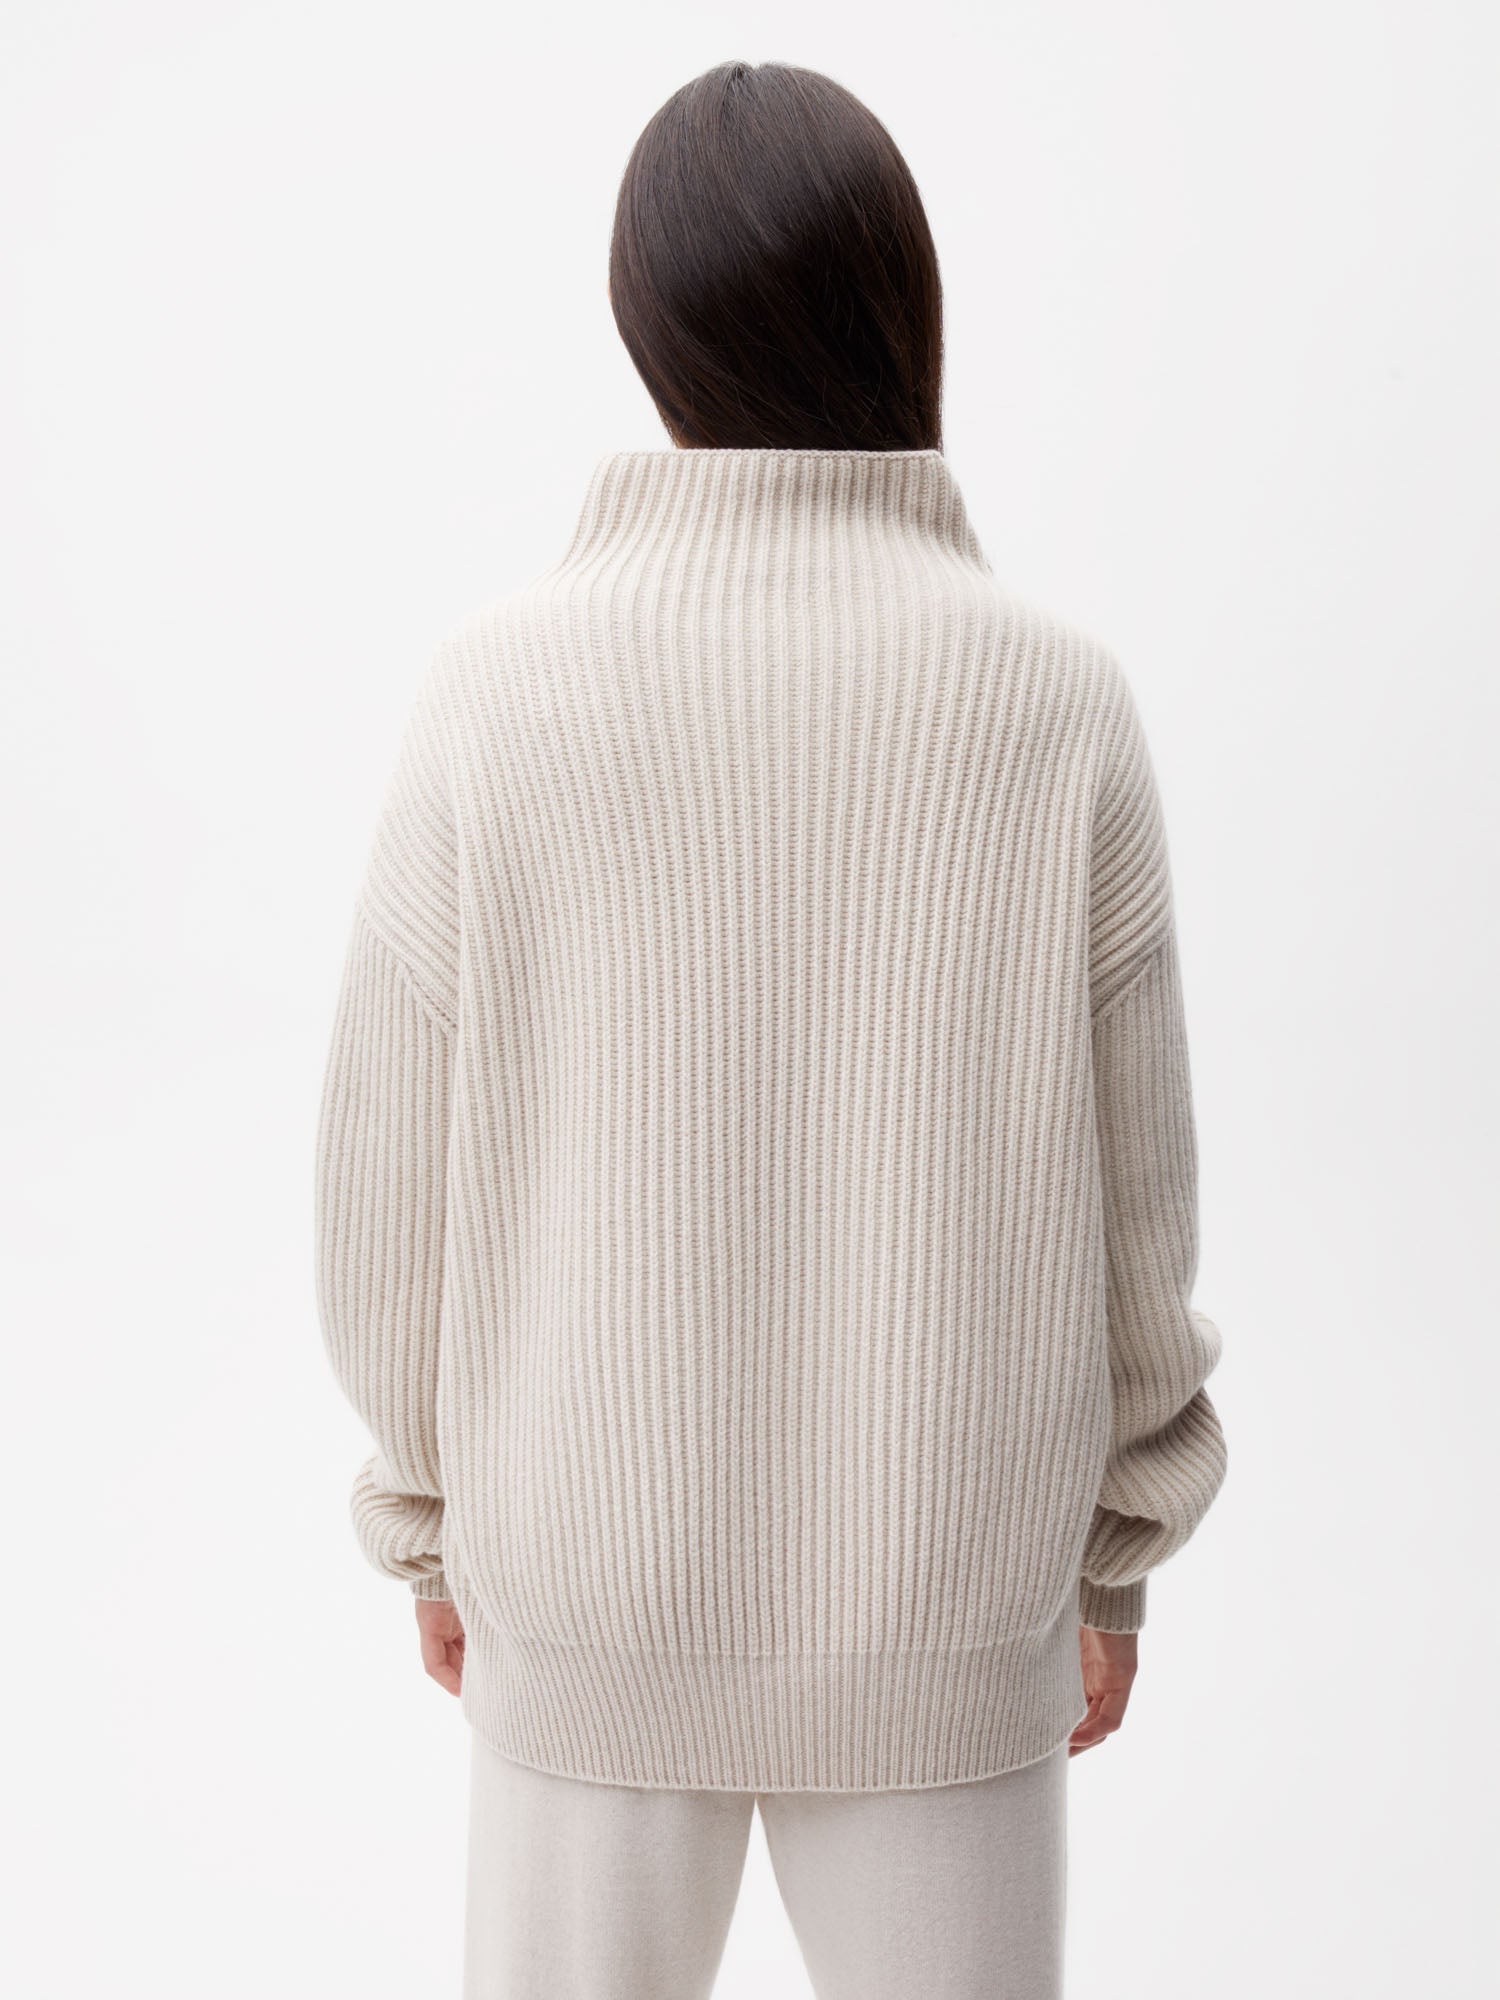    Recycled-Cashmere-Funnel-Neck-Jumper-Oatmeal-Female-2